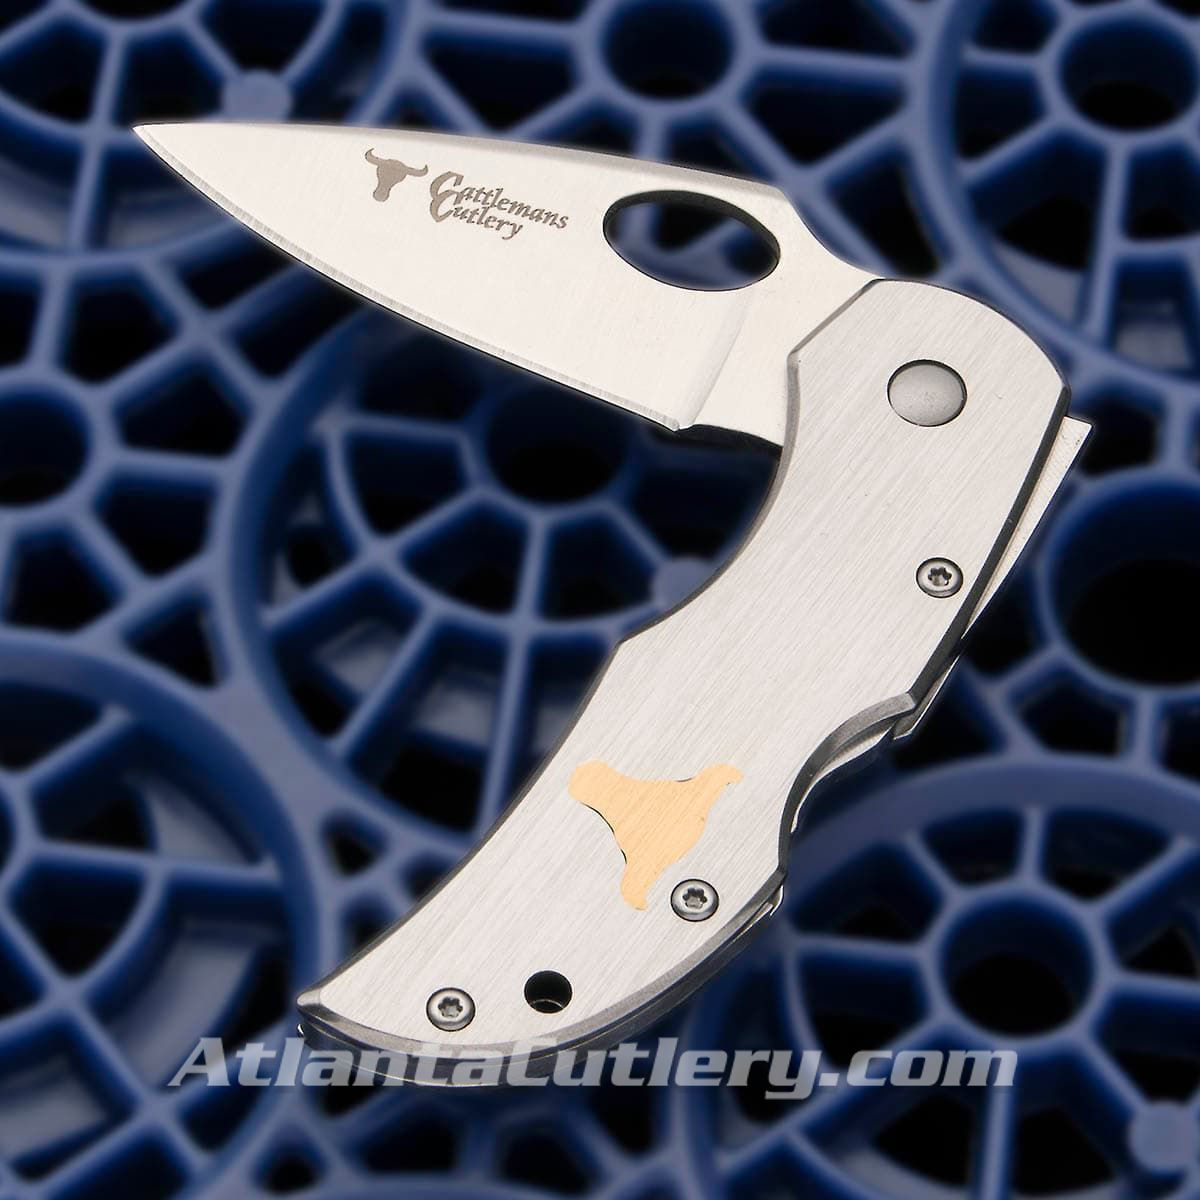 Stainless steel pocket knife is designed to prevent rust, has inlaid solid brass steer head, large thumb-hole and thumb-rest